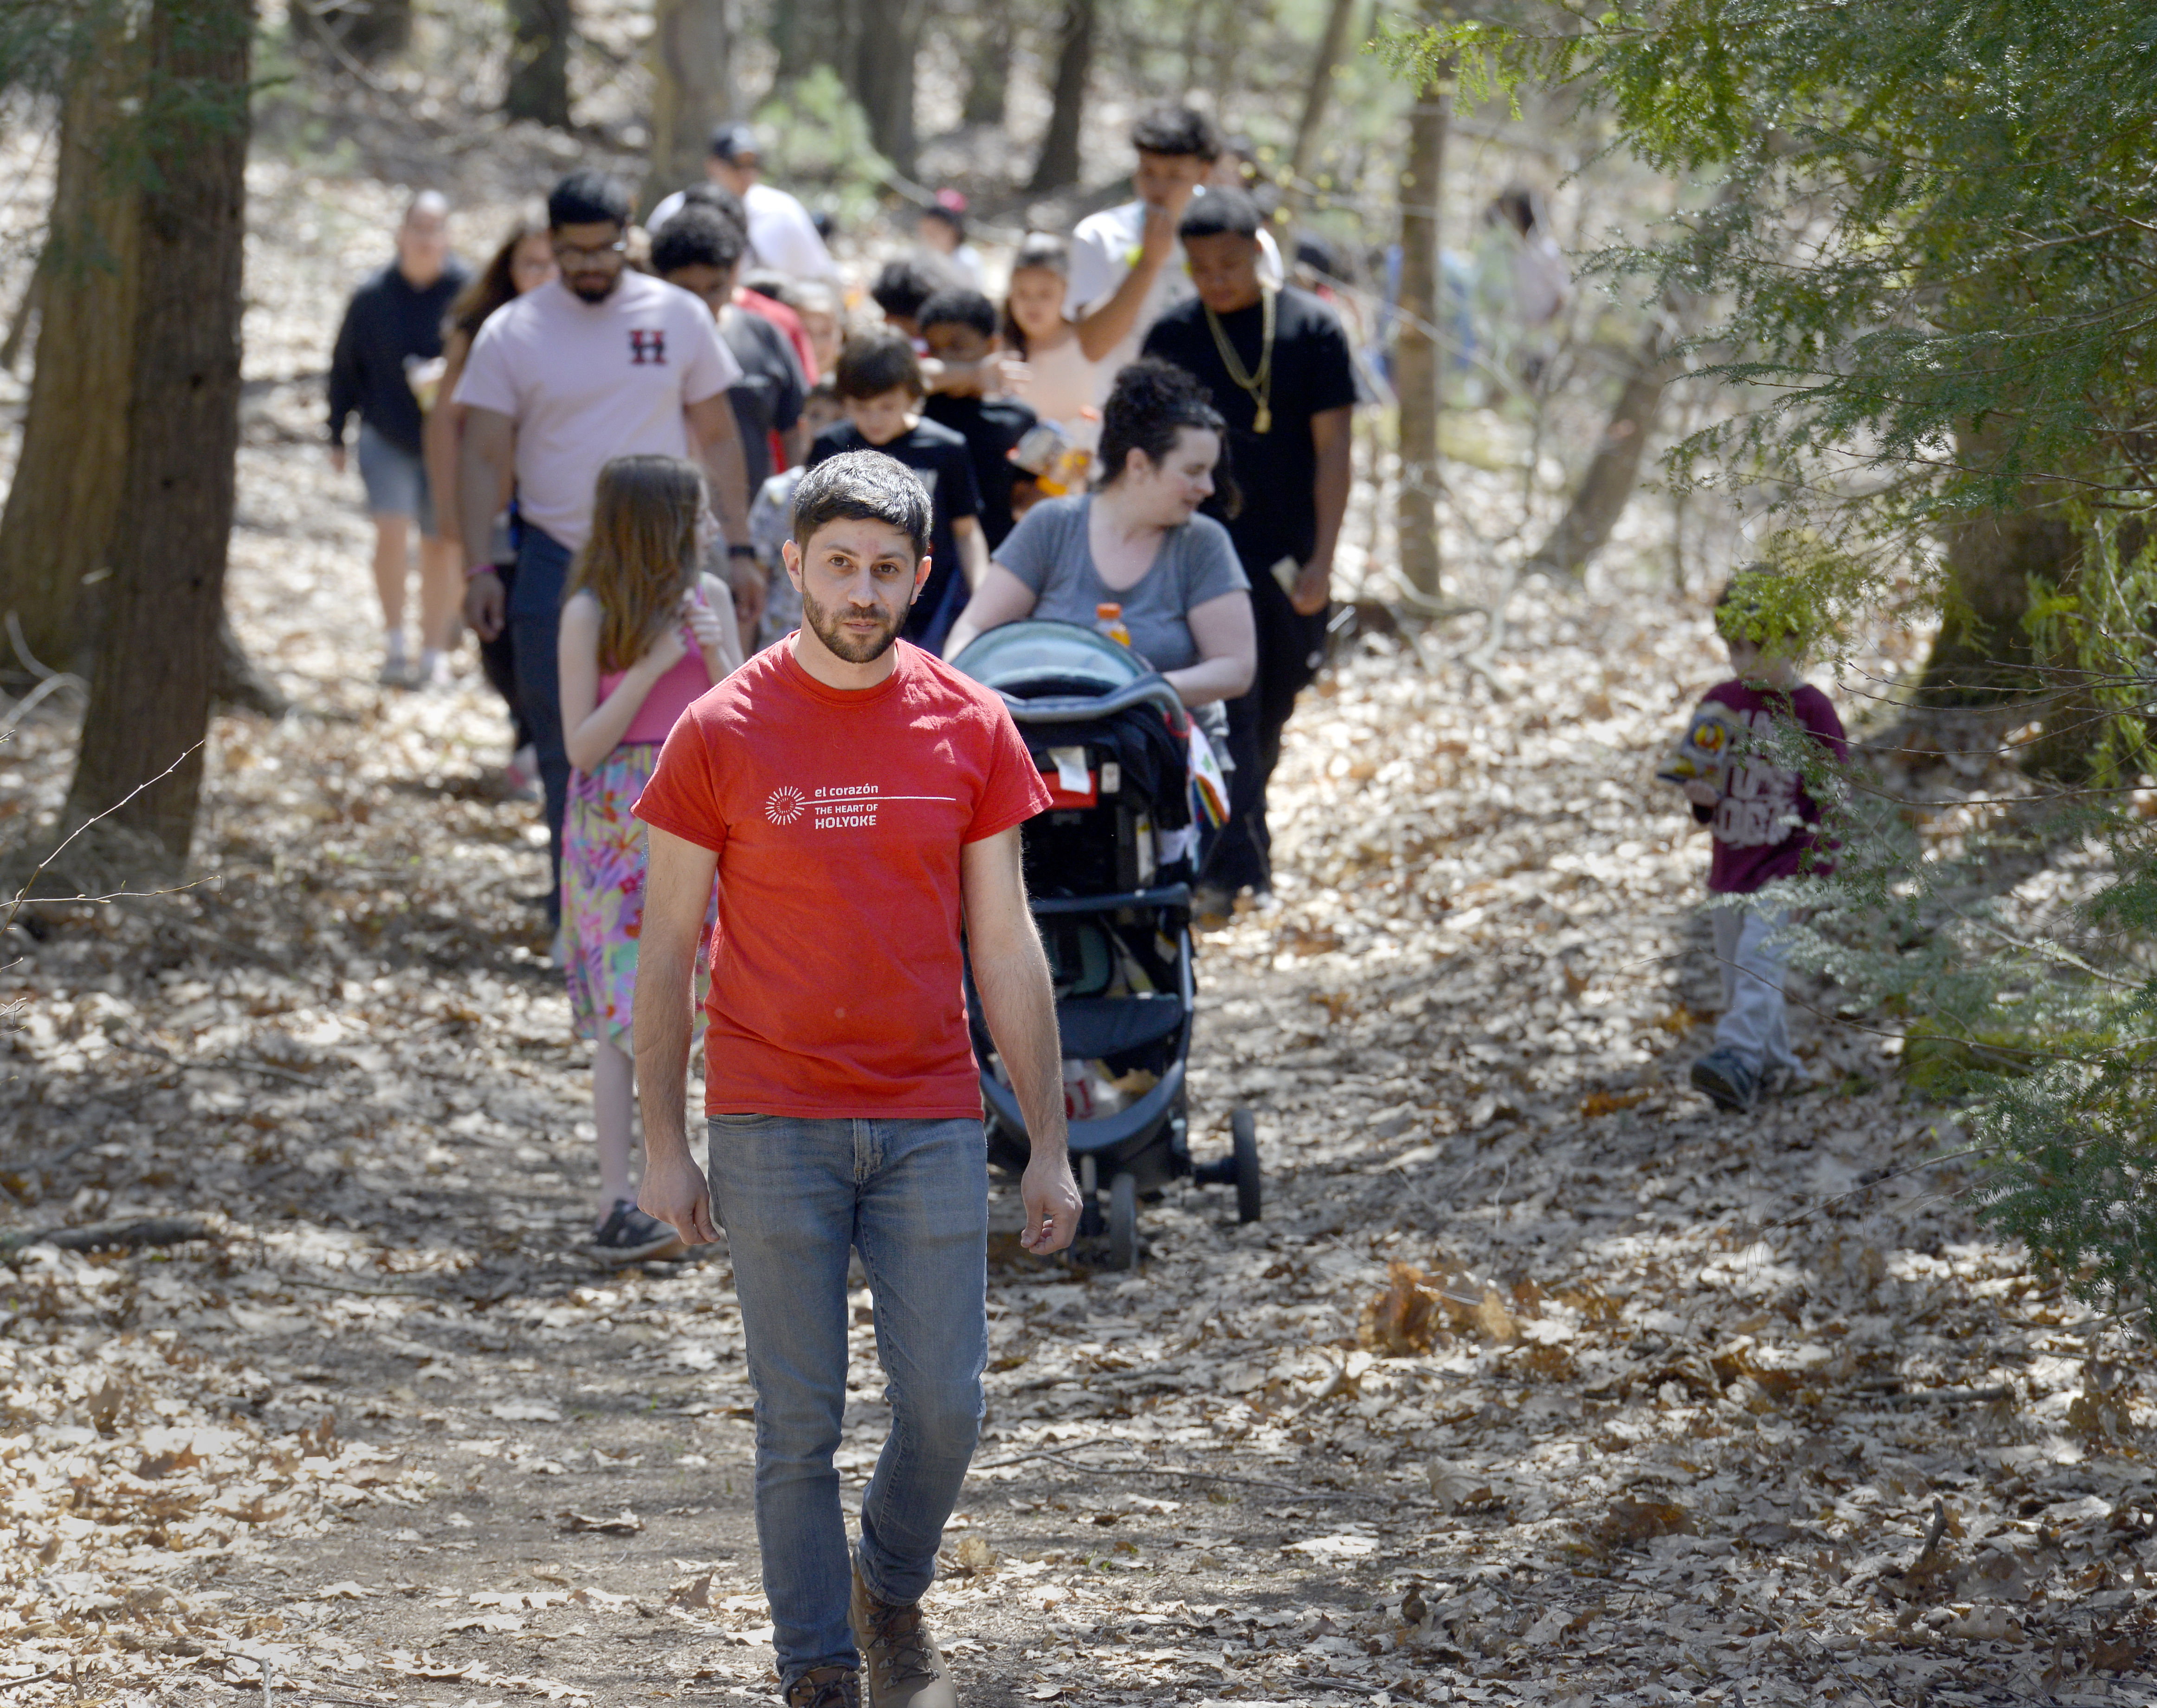 Yoni Glogower, Holyoke's Director of Conservation and Sustainability, leads a hike along the recently renovated Gloutak Woods Trail.  (Don Treeger / The Republican)  4/21/2023